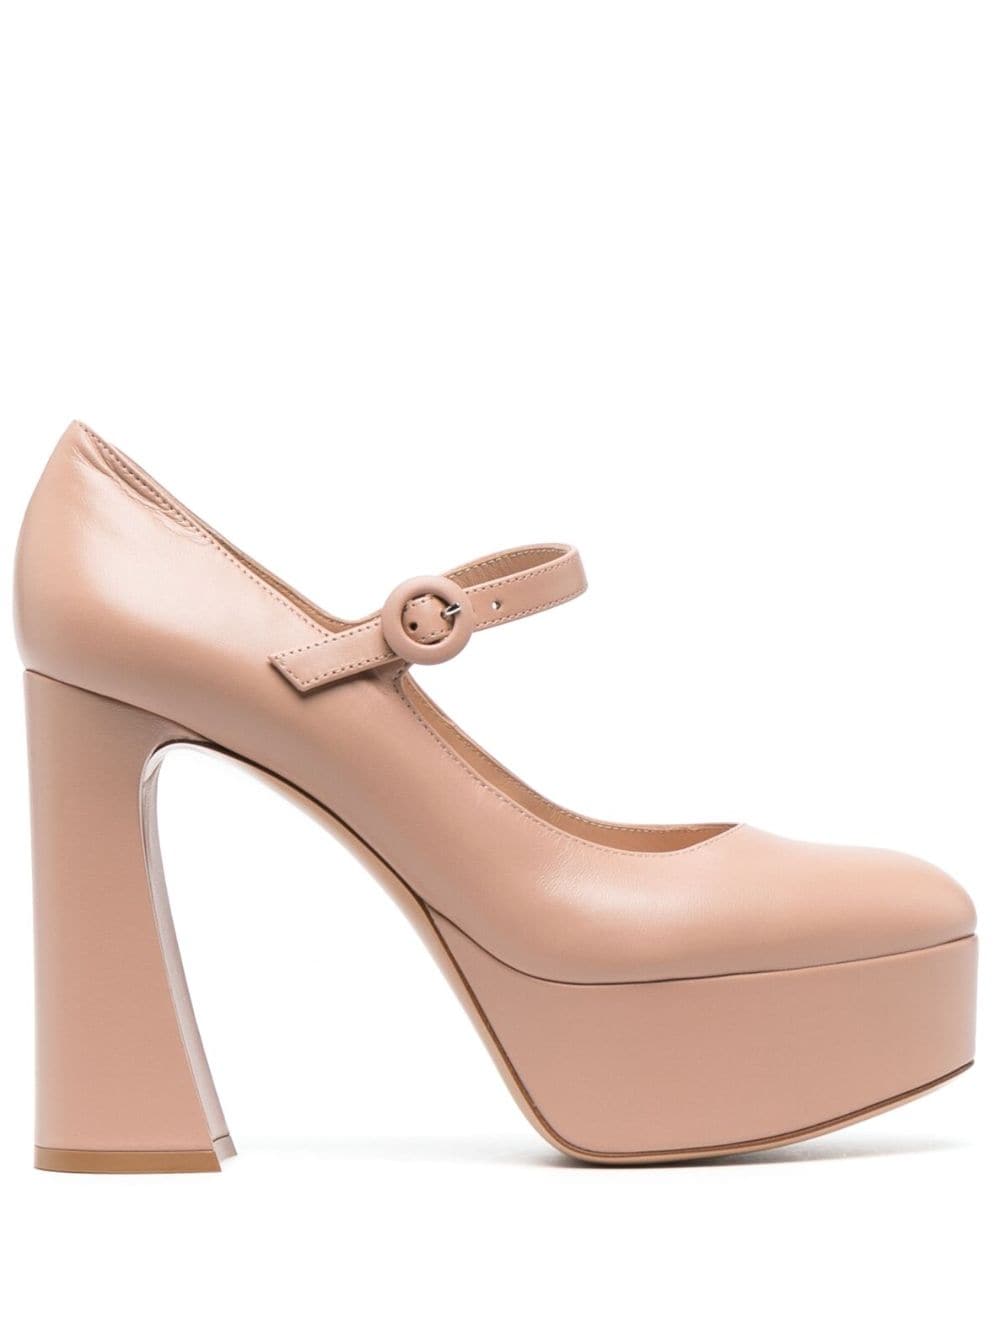 Gianvito Rossi With Heel Pink